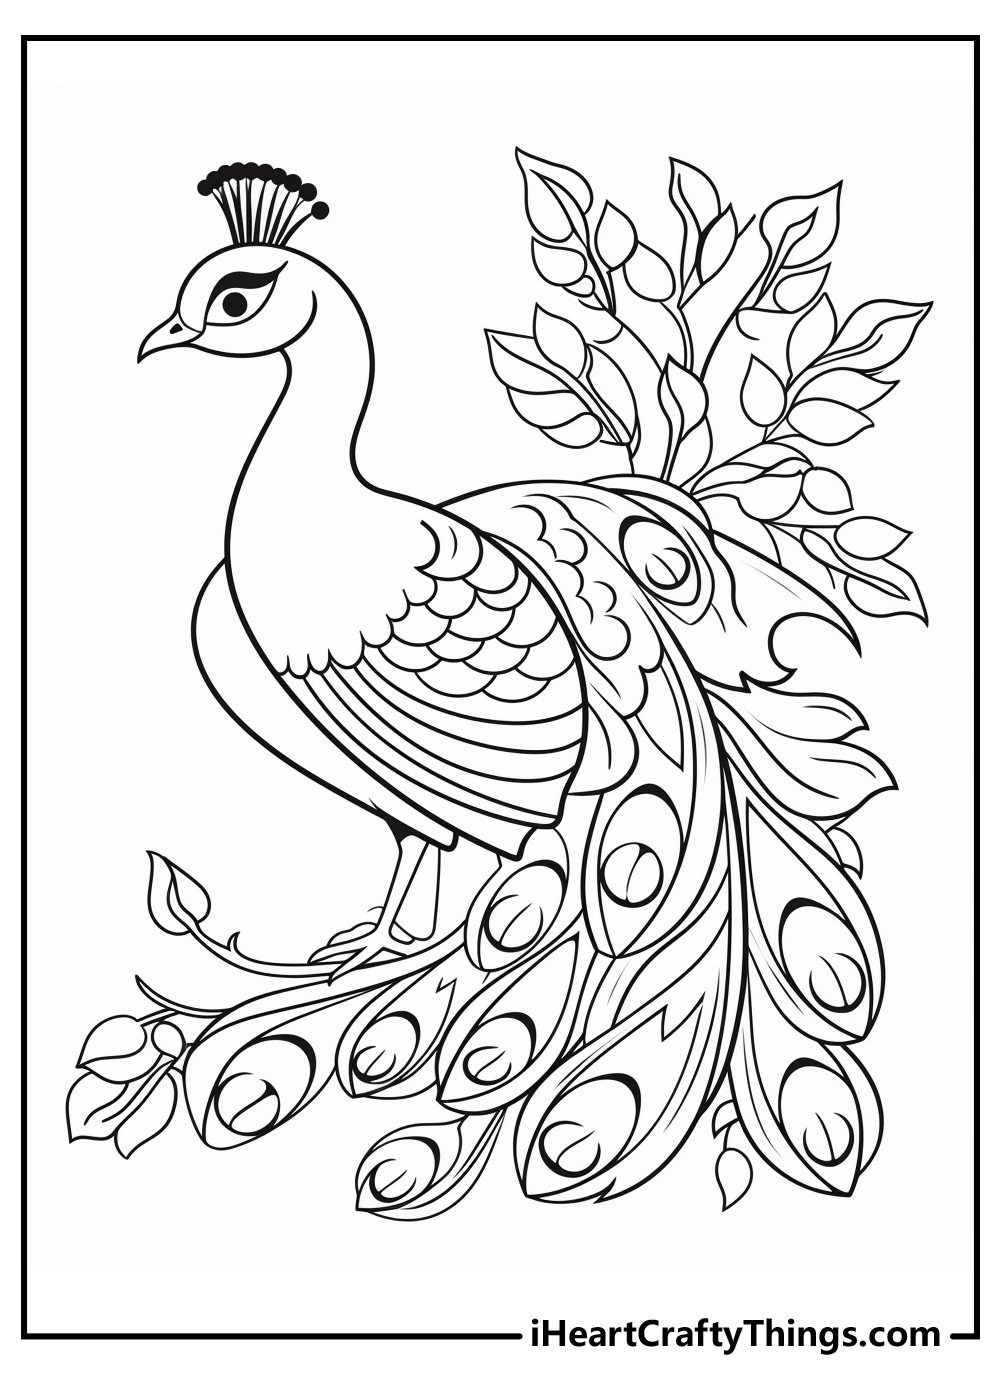 new peacock coloring sheet free download